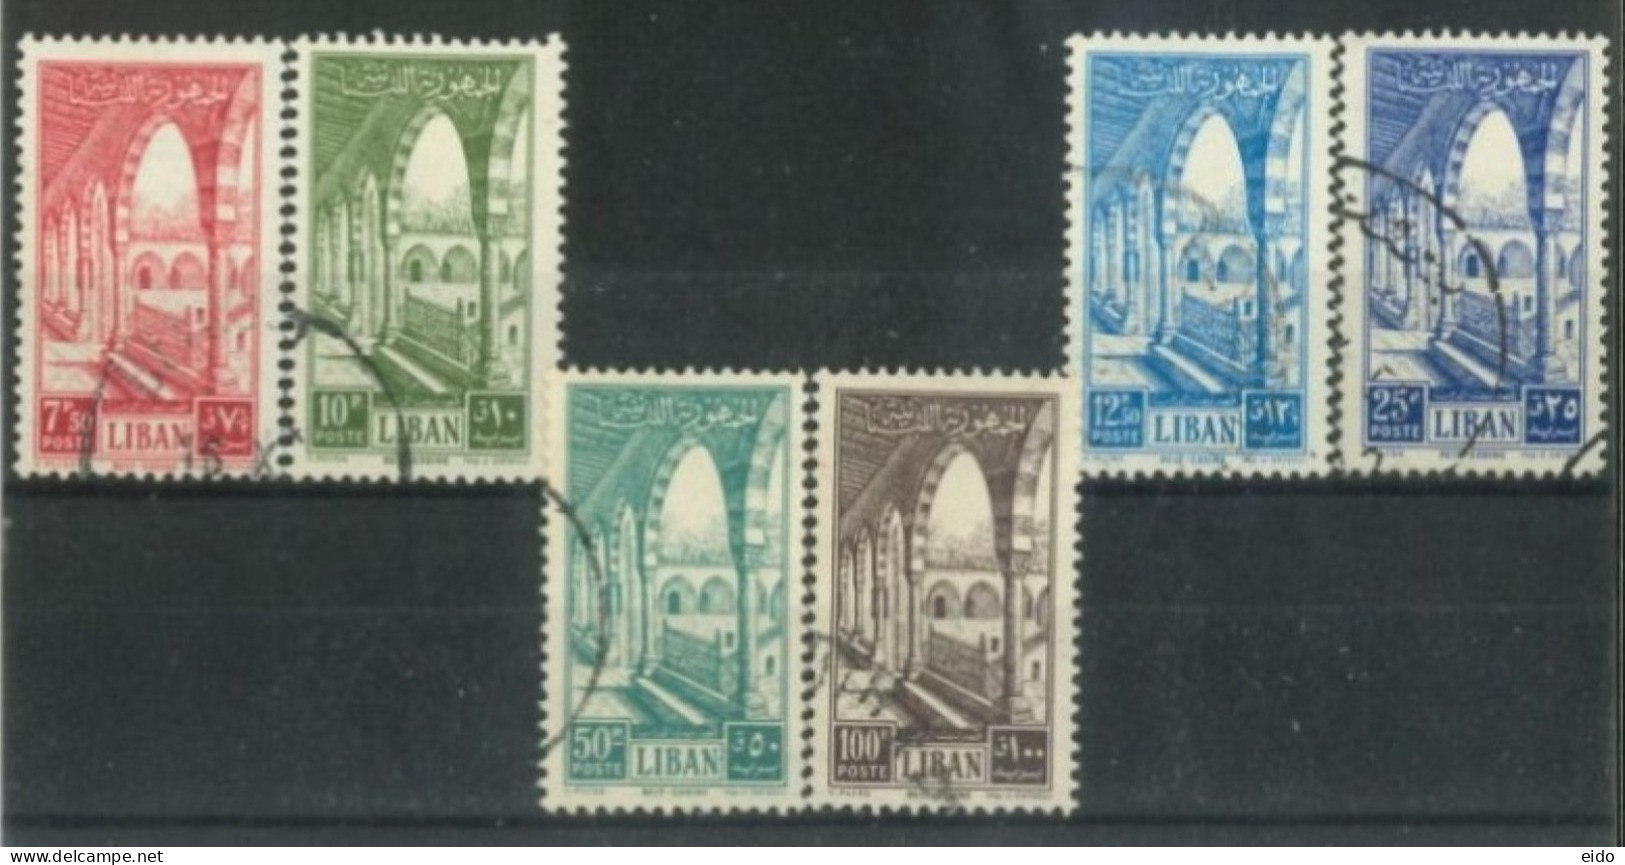 LEBANON. - 1954, BEIT ED - DIN PALACE STAMPS COMPLETE SET OF 6 SG # 485/90, USED. - Lebanon